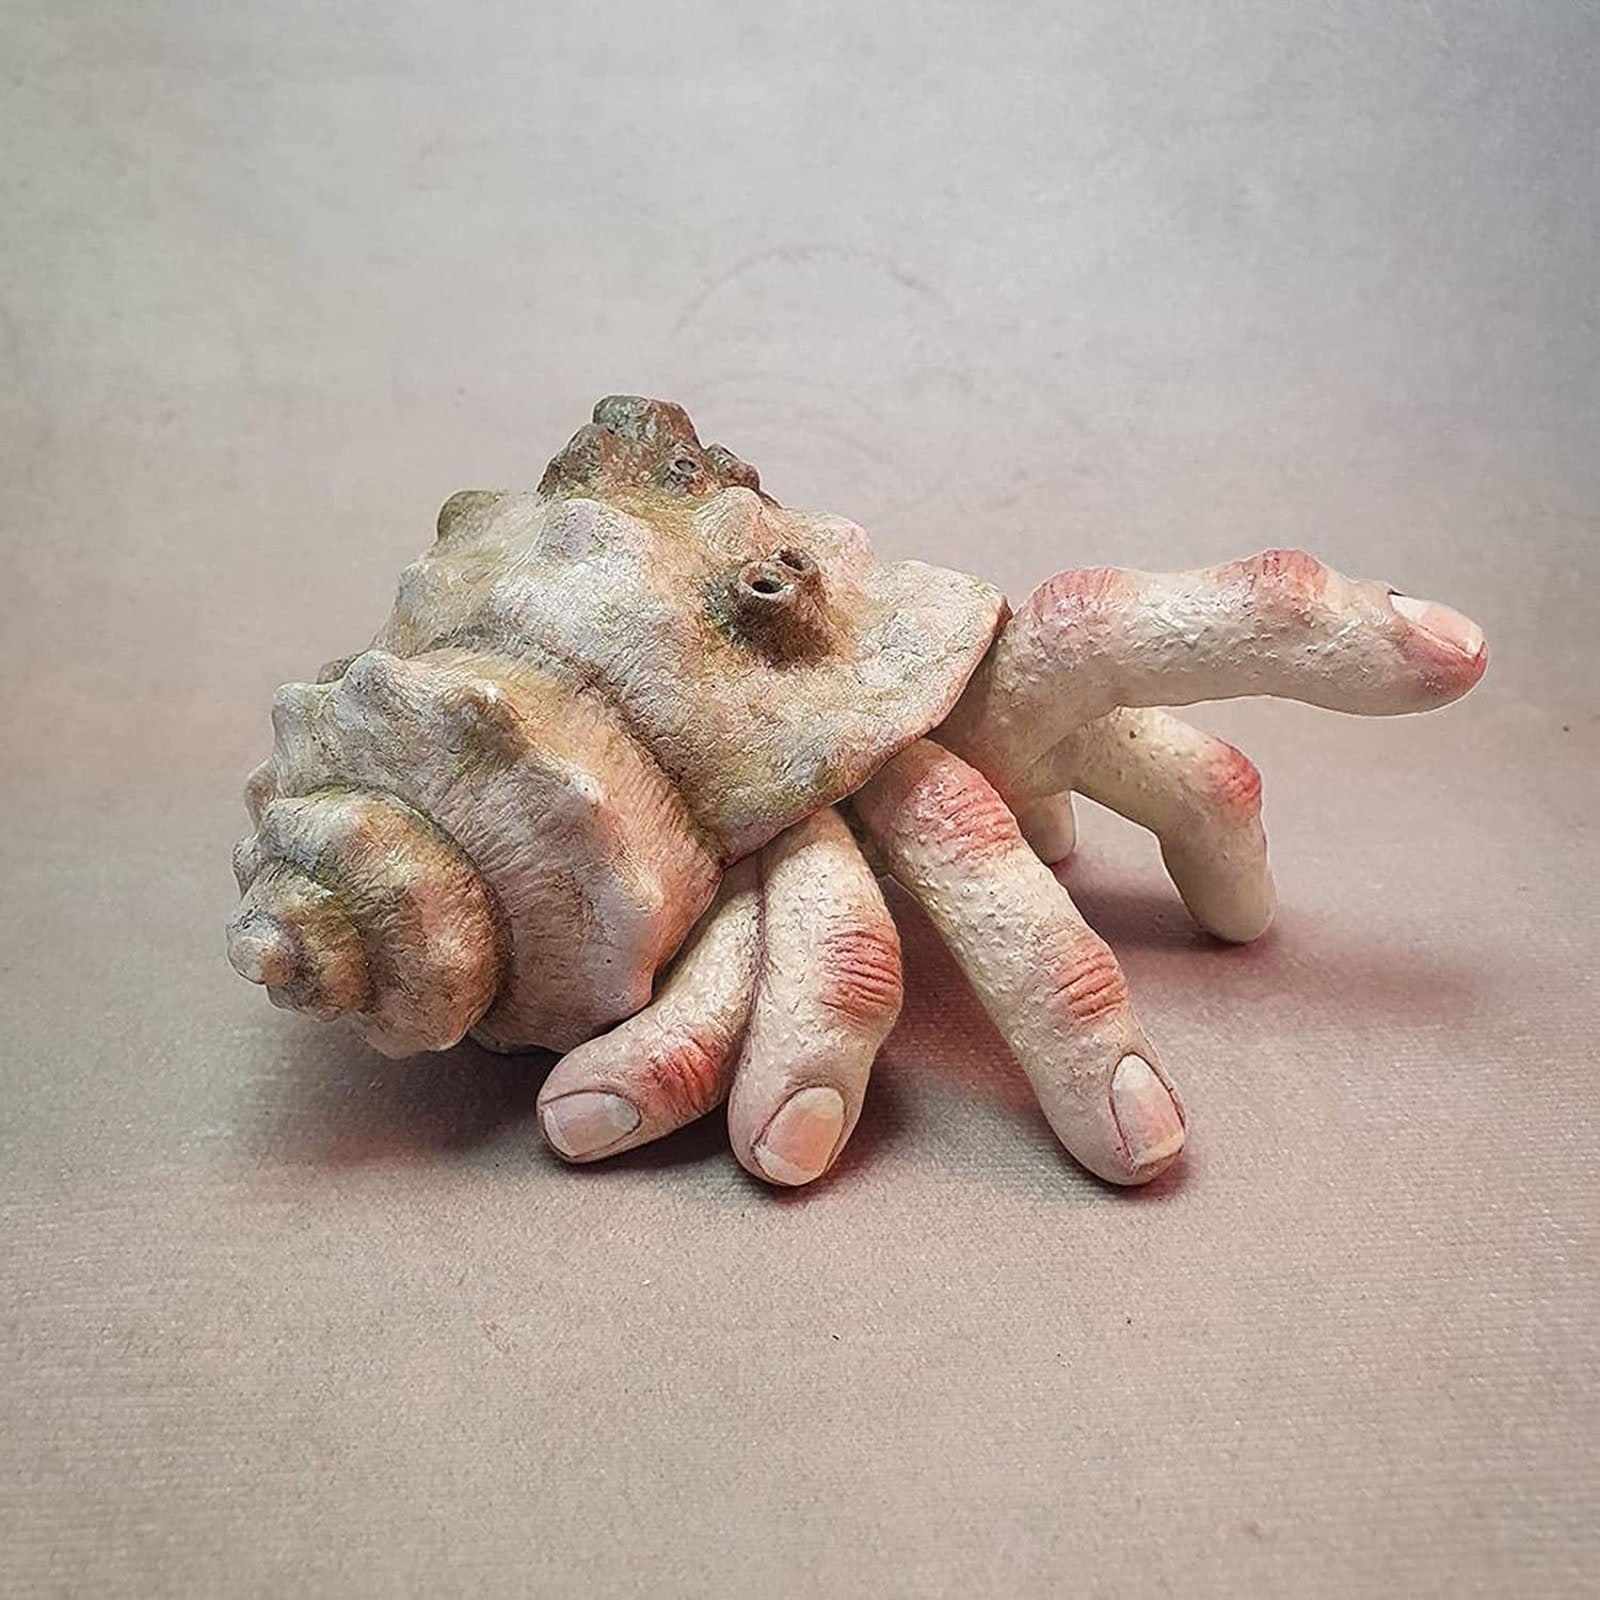 A hermit crab finger sculpture which has 6 fingers and appears to be walking along a surface with one finger in the air.